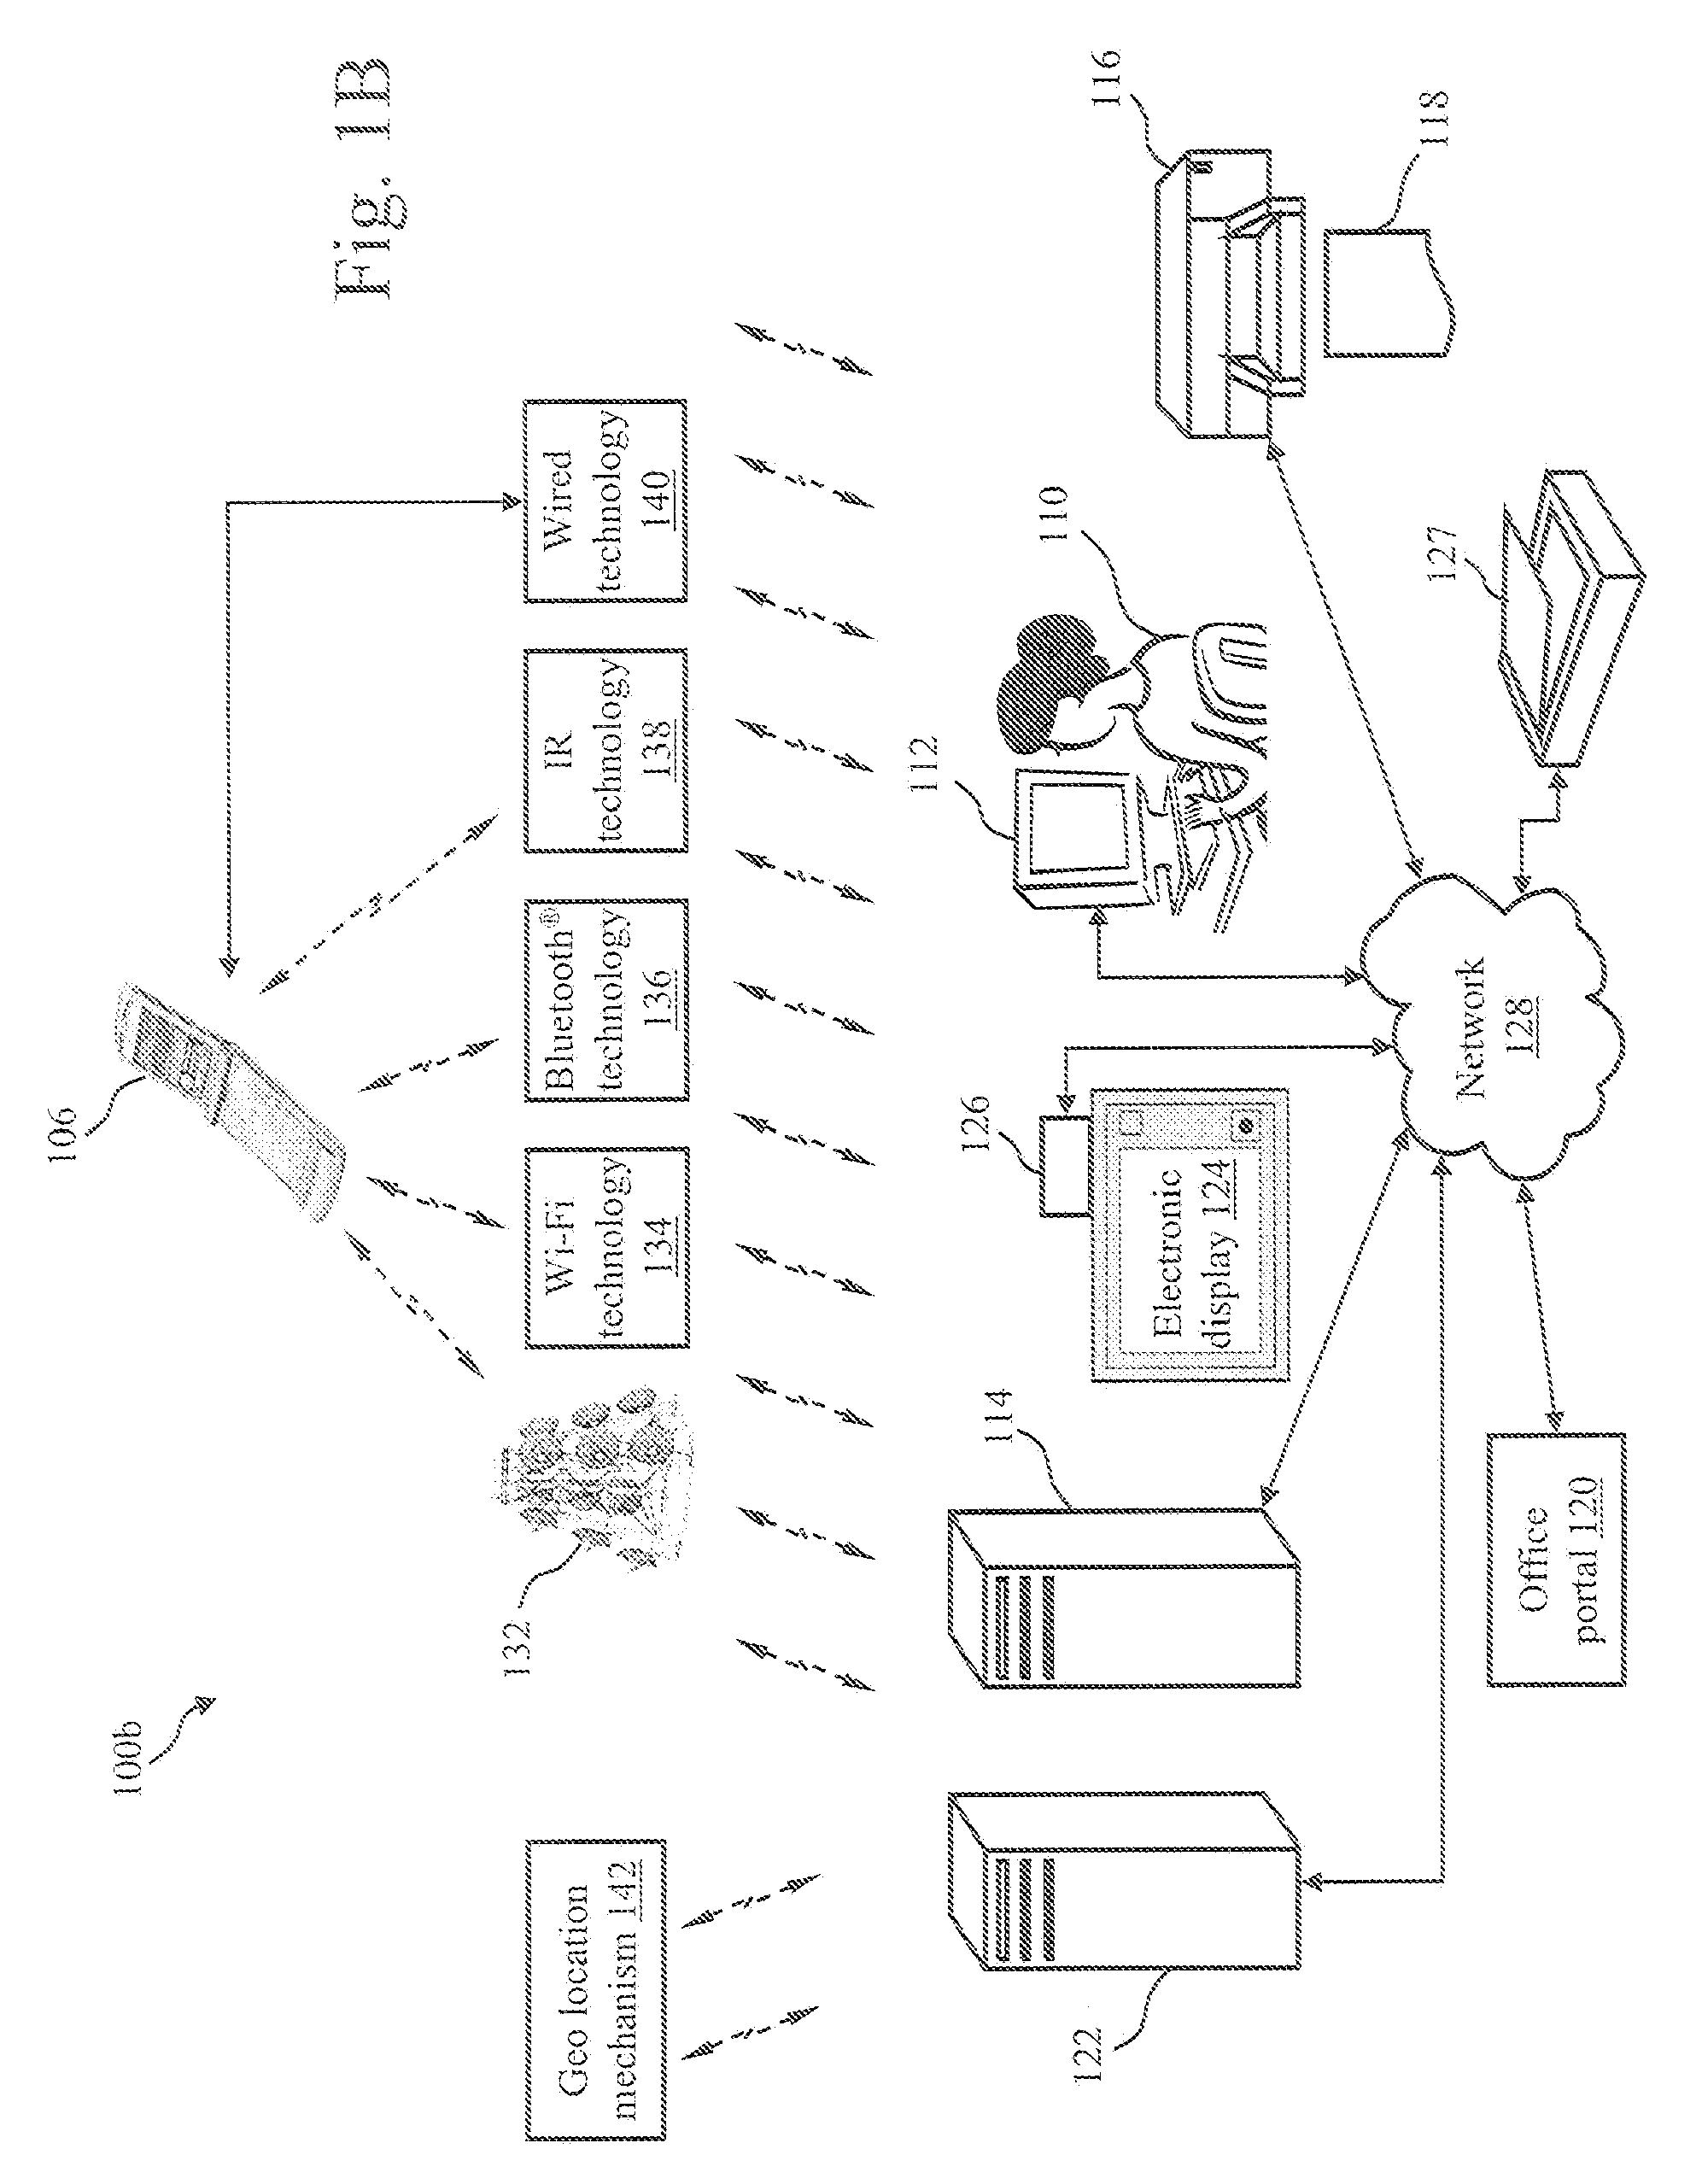 System and methods for use of voice mail and email in a mixed media environment